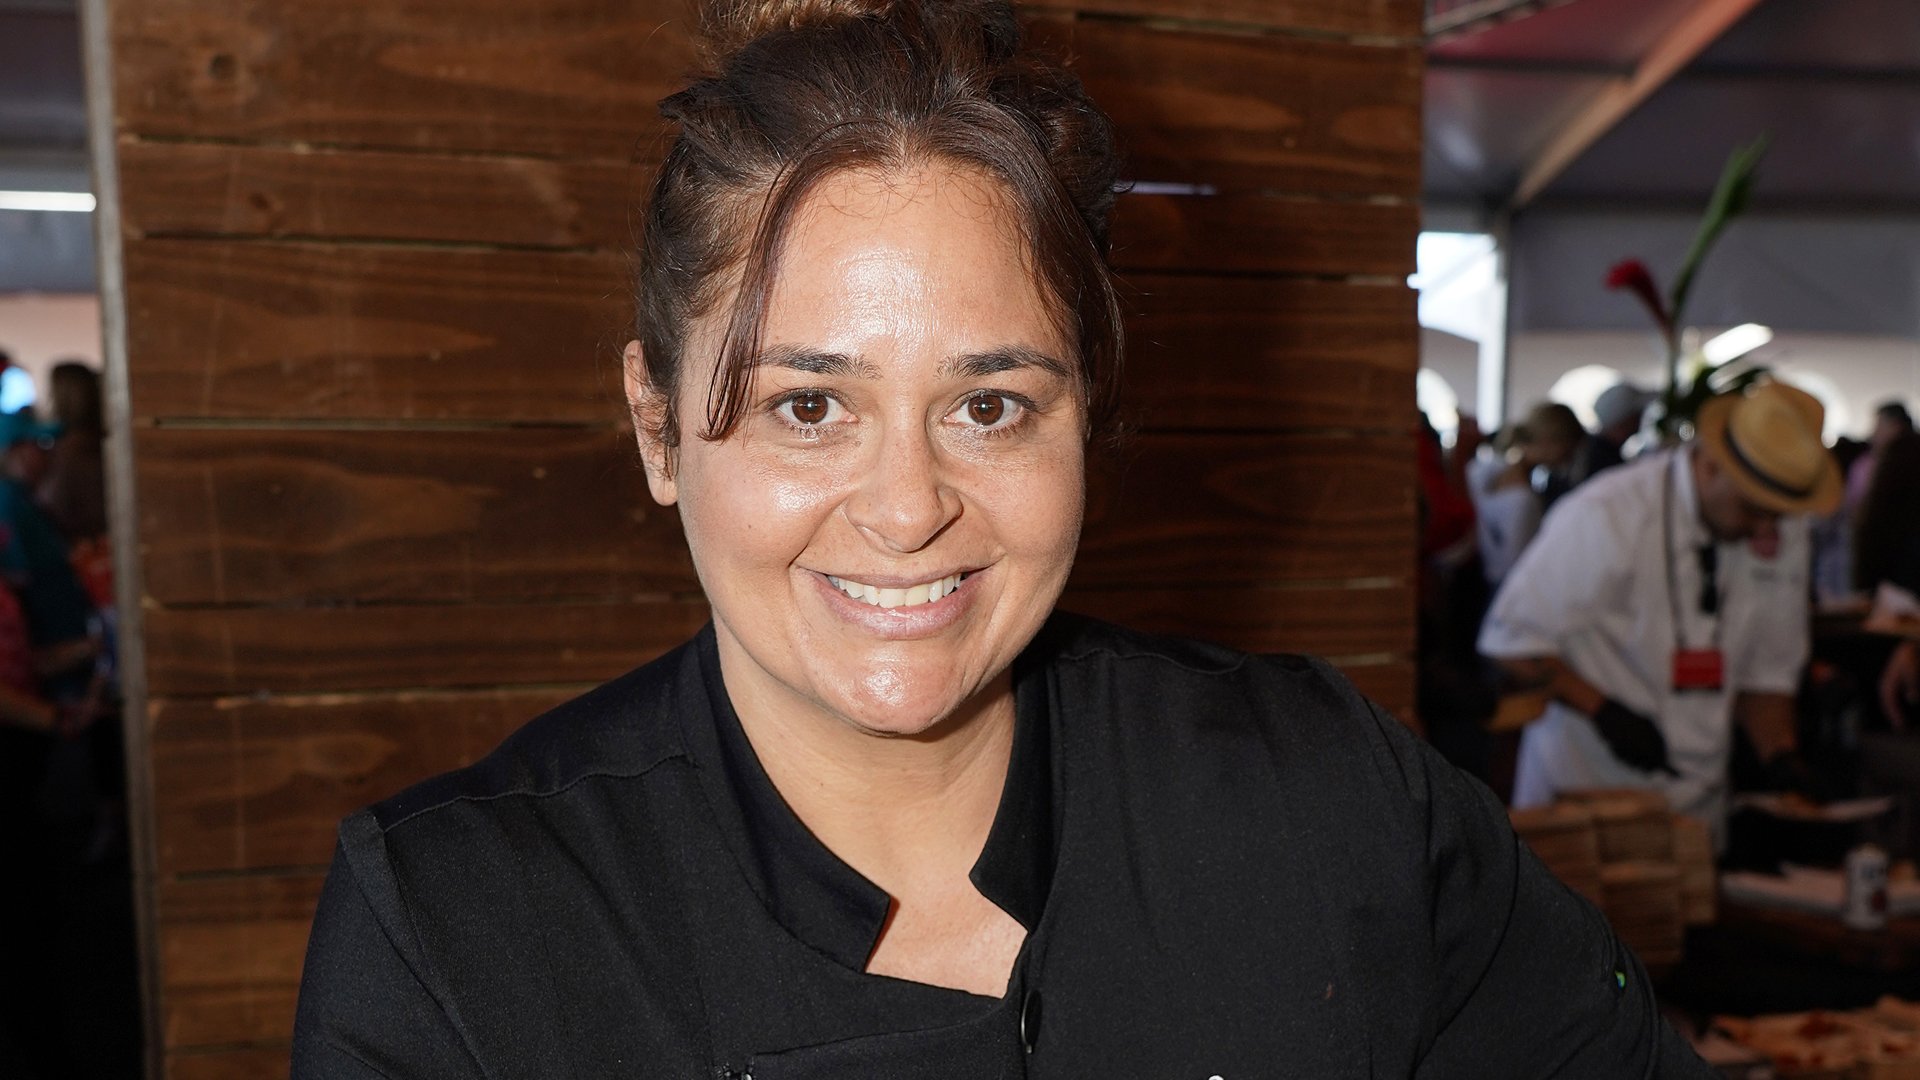 Chef Antonia Lofaso attends The Players Tailgate 2020 Miami by Bullseye Event Group on February 02, 2020 in Miami, Florida. 